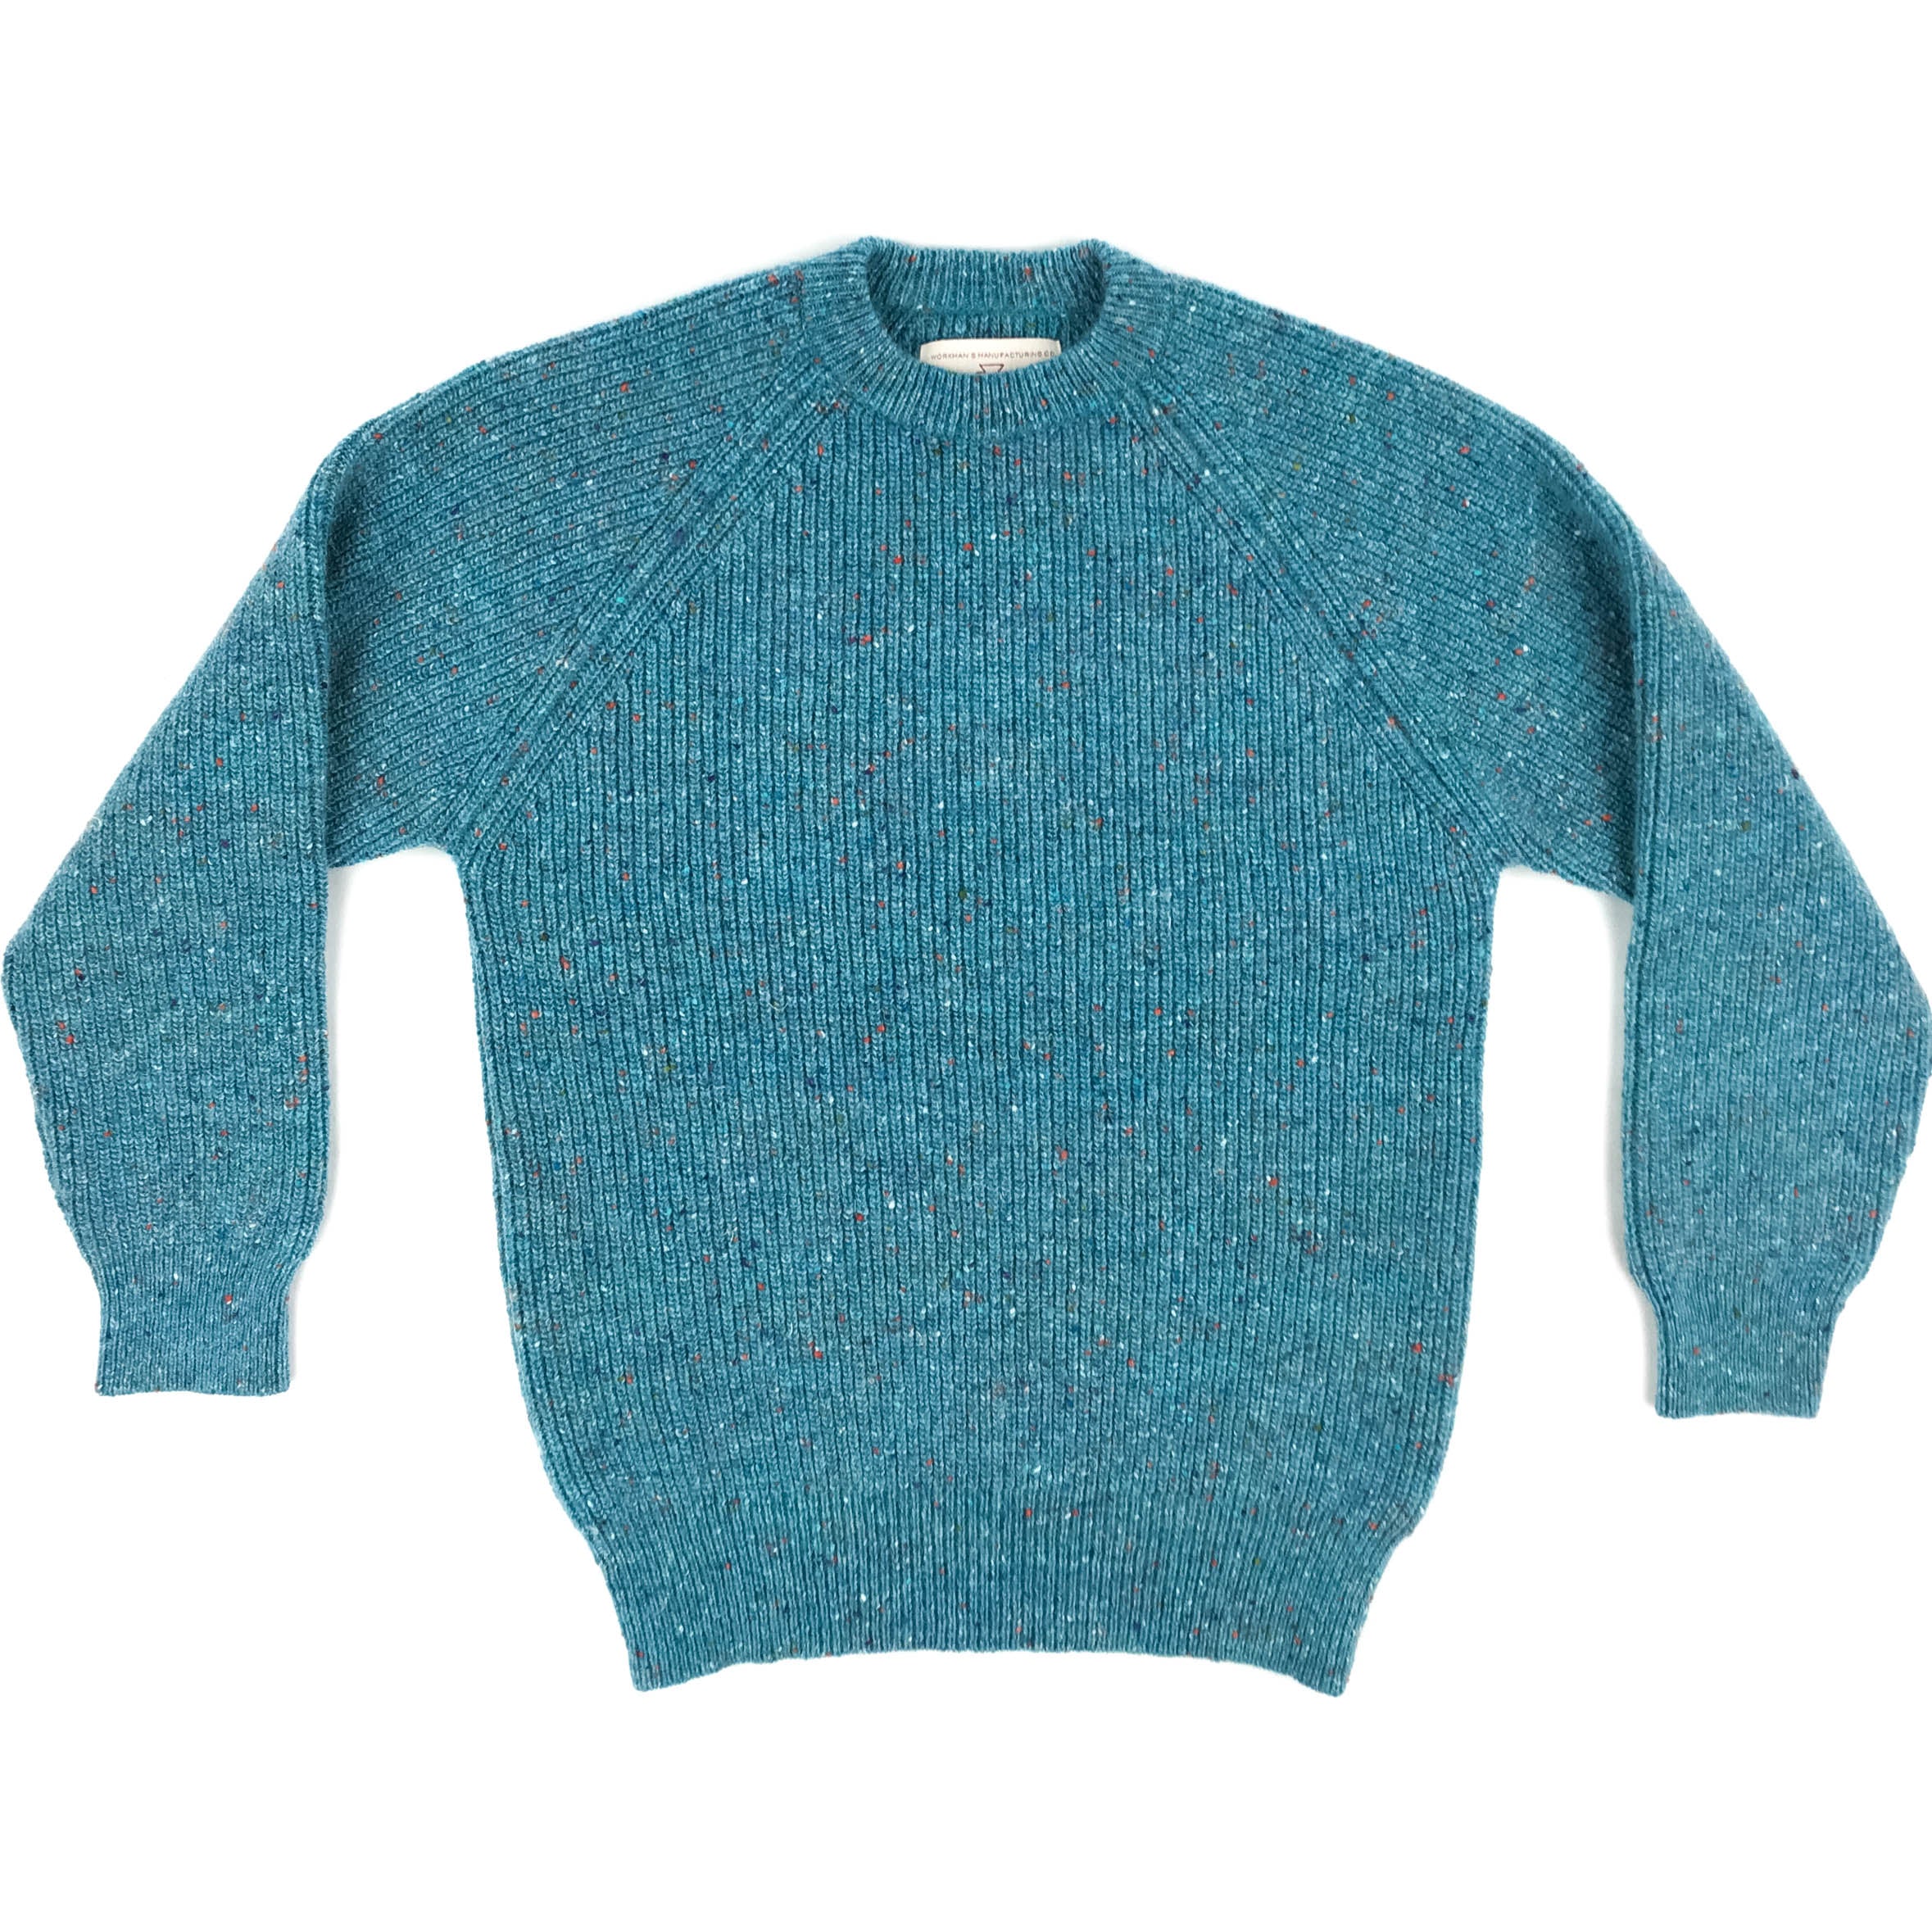 How To Wash Your Mohair Jumper by Georgie Lavin